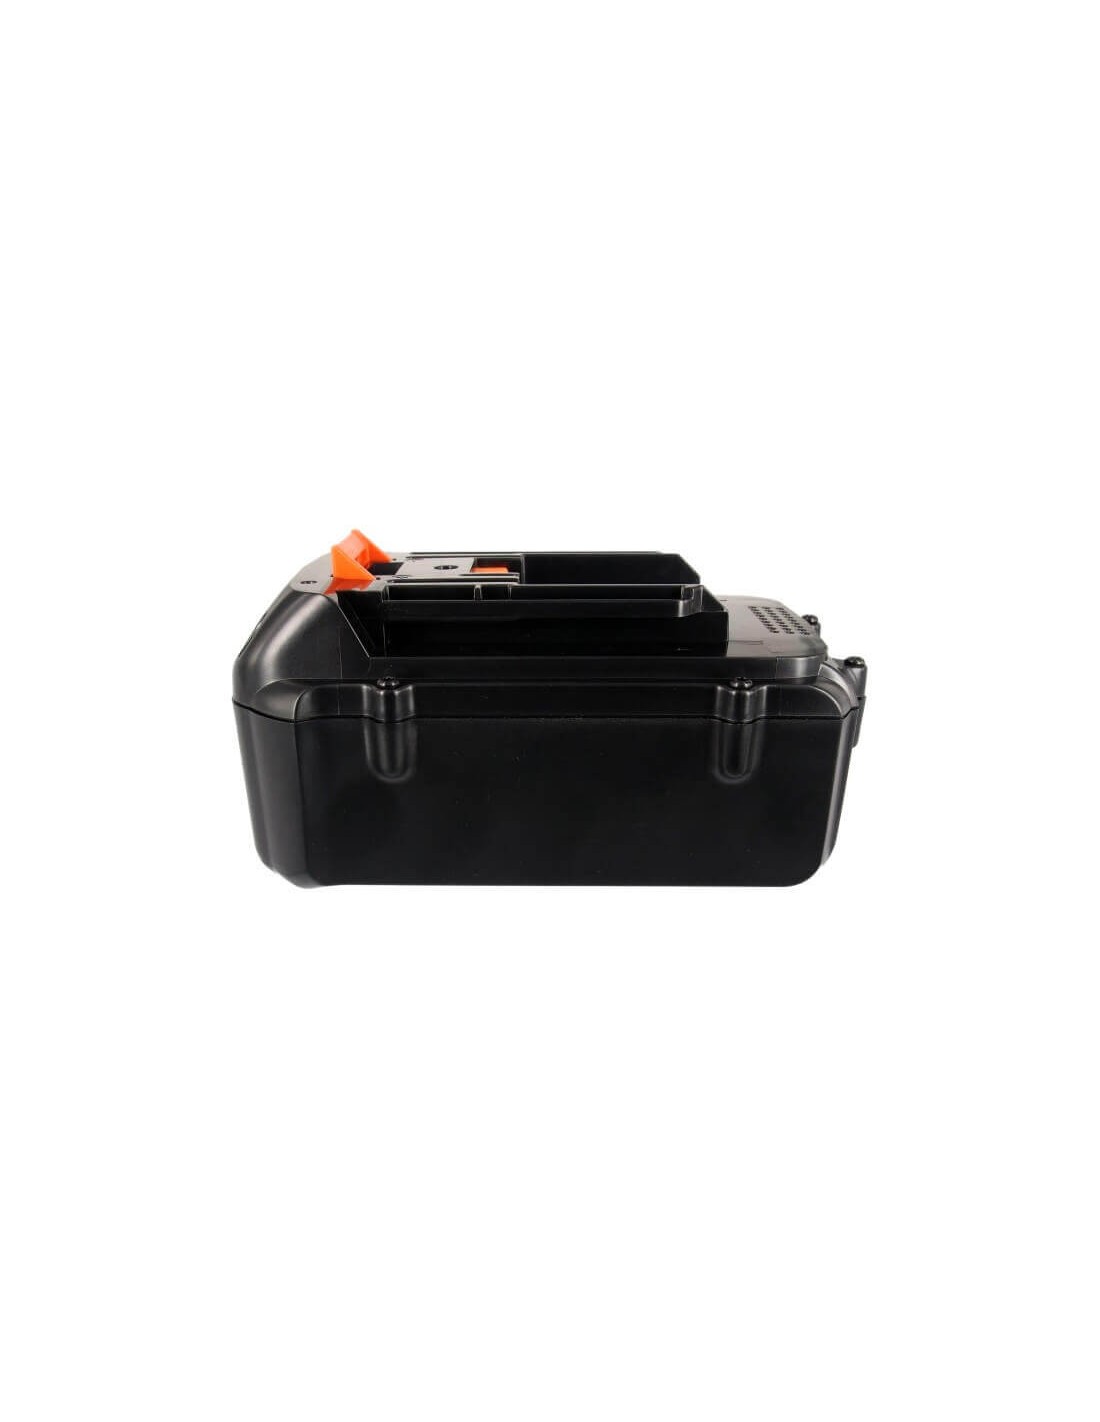 Battery for Makita Bhr261, Bhr261rde, Lawnmower Mbc231drd 36V, 4000mAh - 144.00Wh